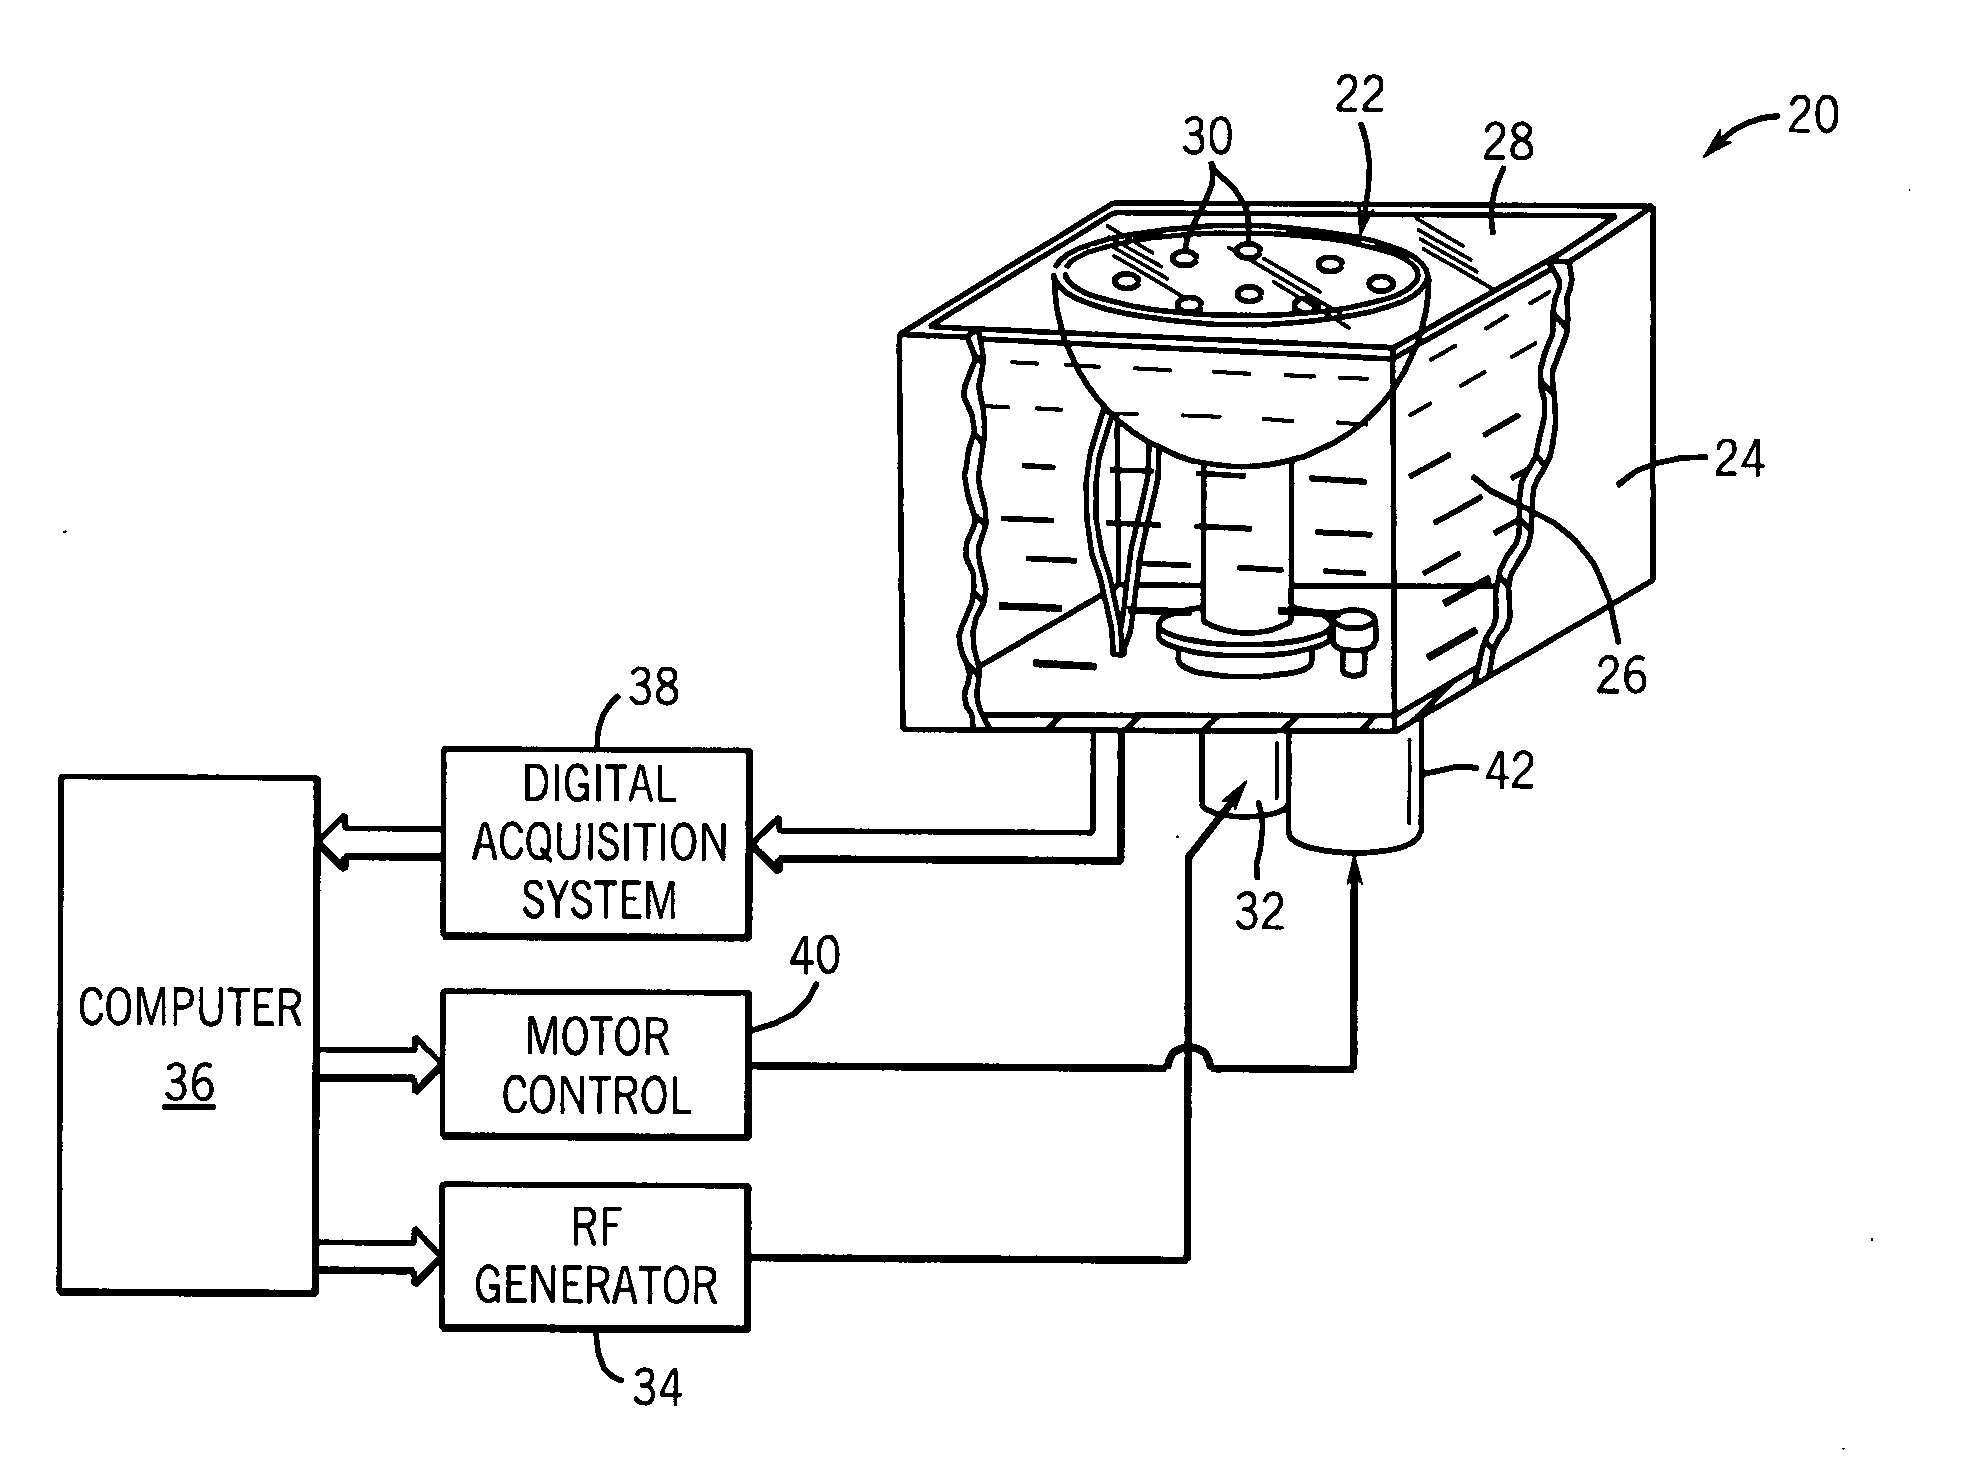 Method and system of thermoacoustic computed tomography